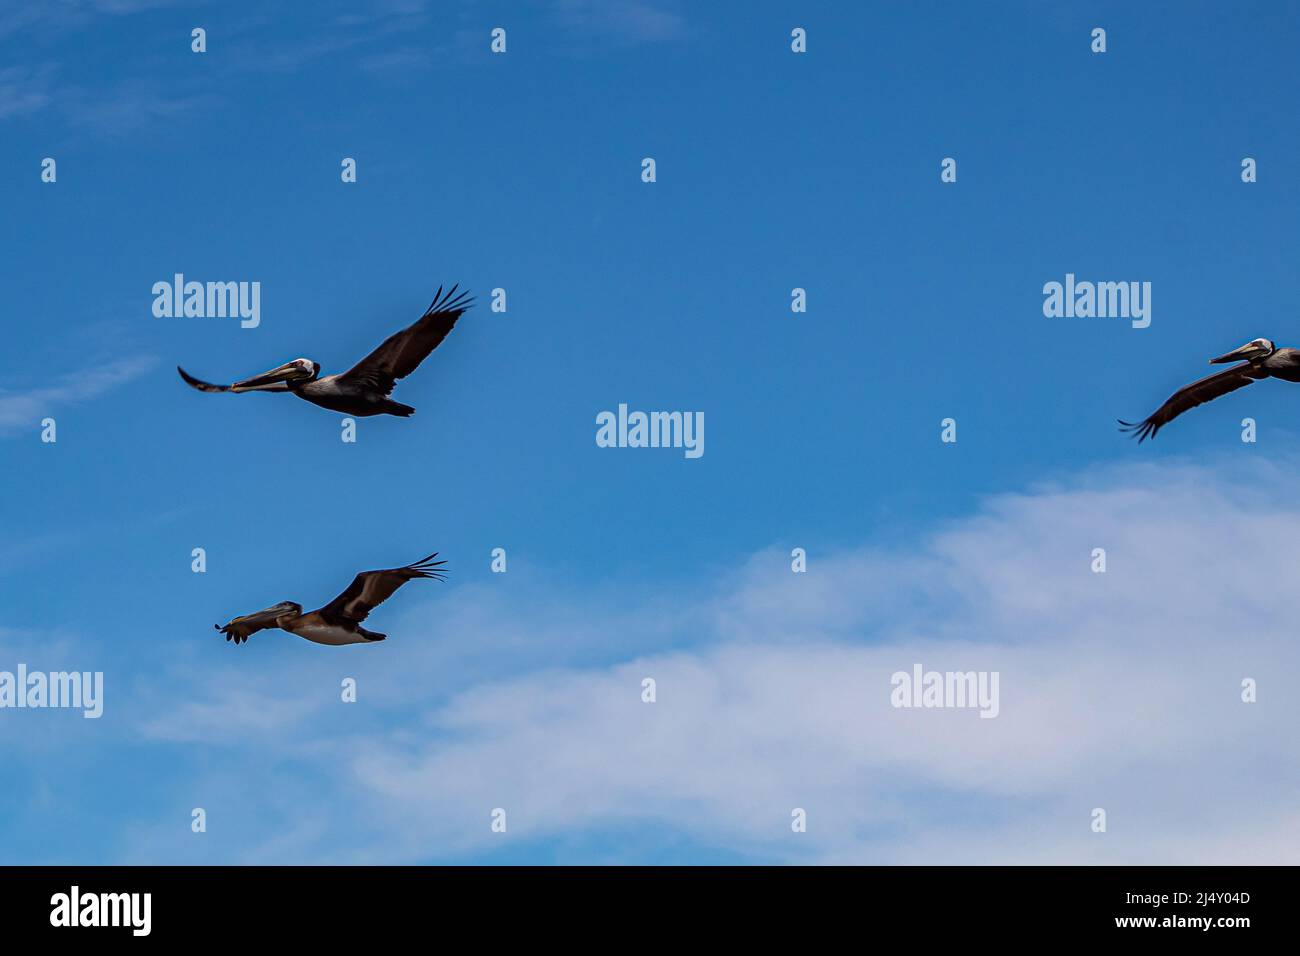 Three pelicans flying in the partly cloudy sky. Stock Photo